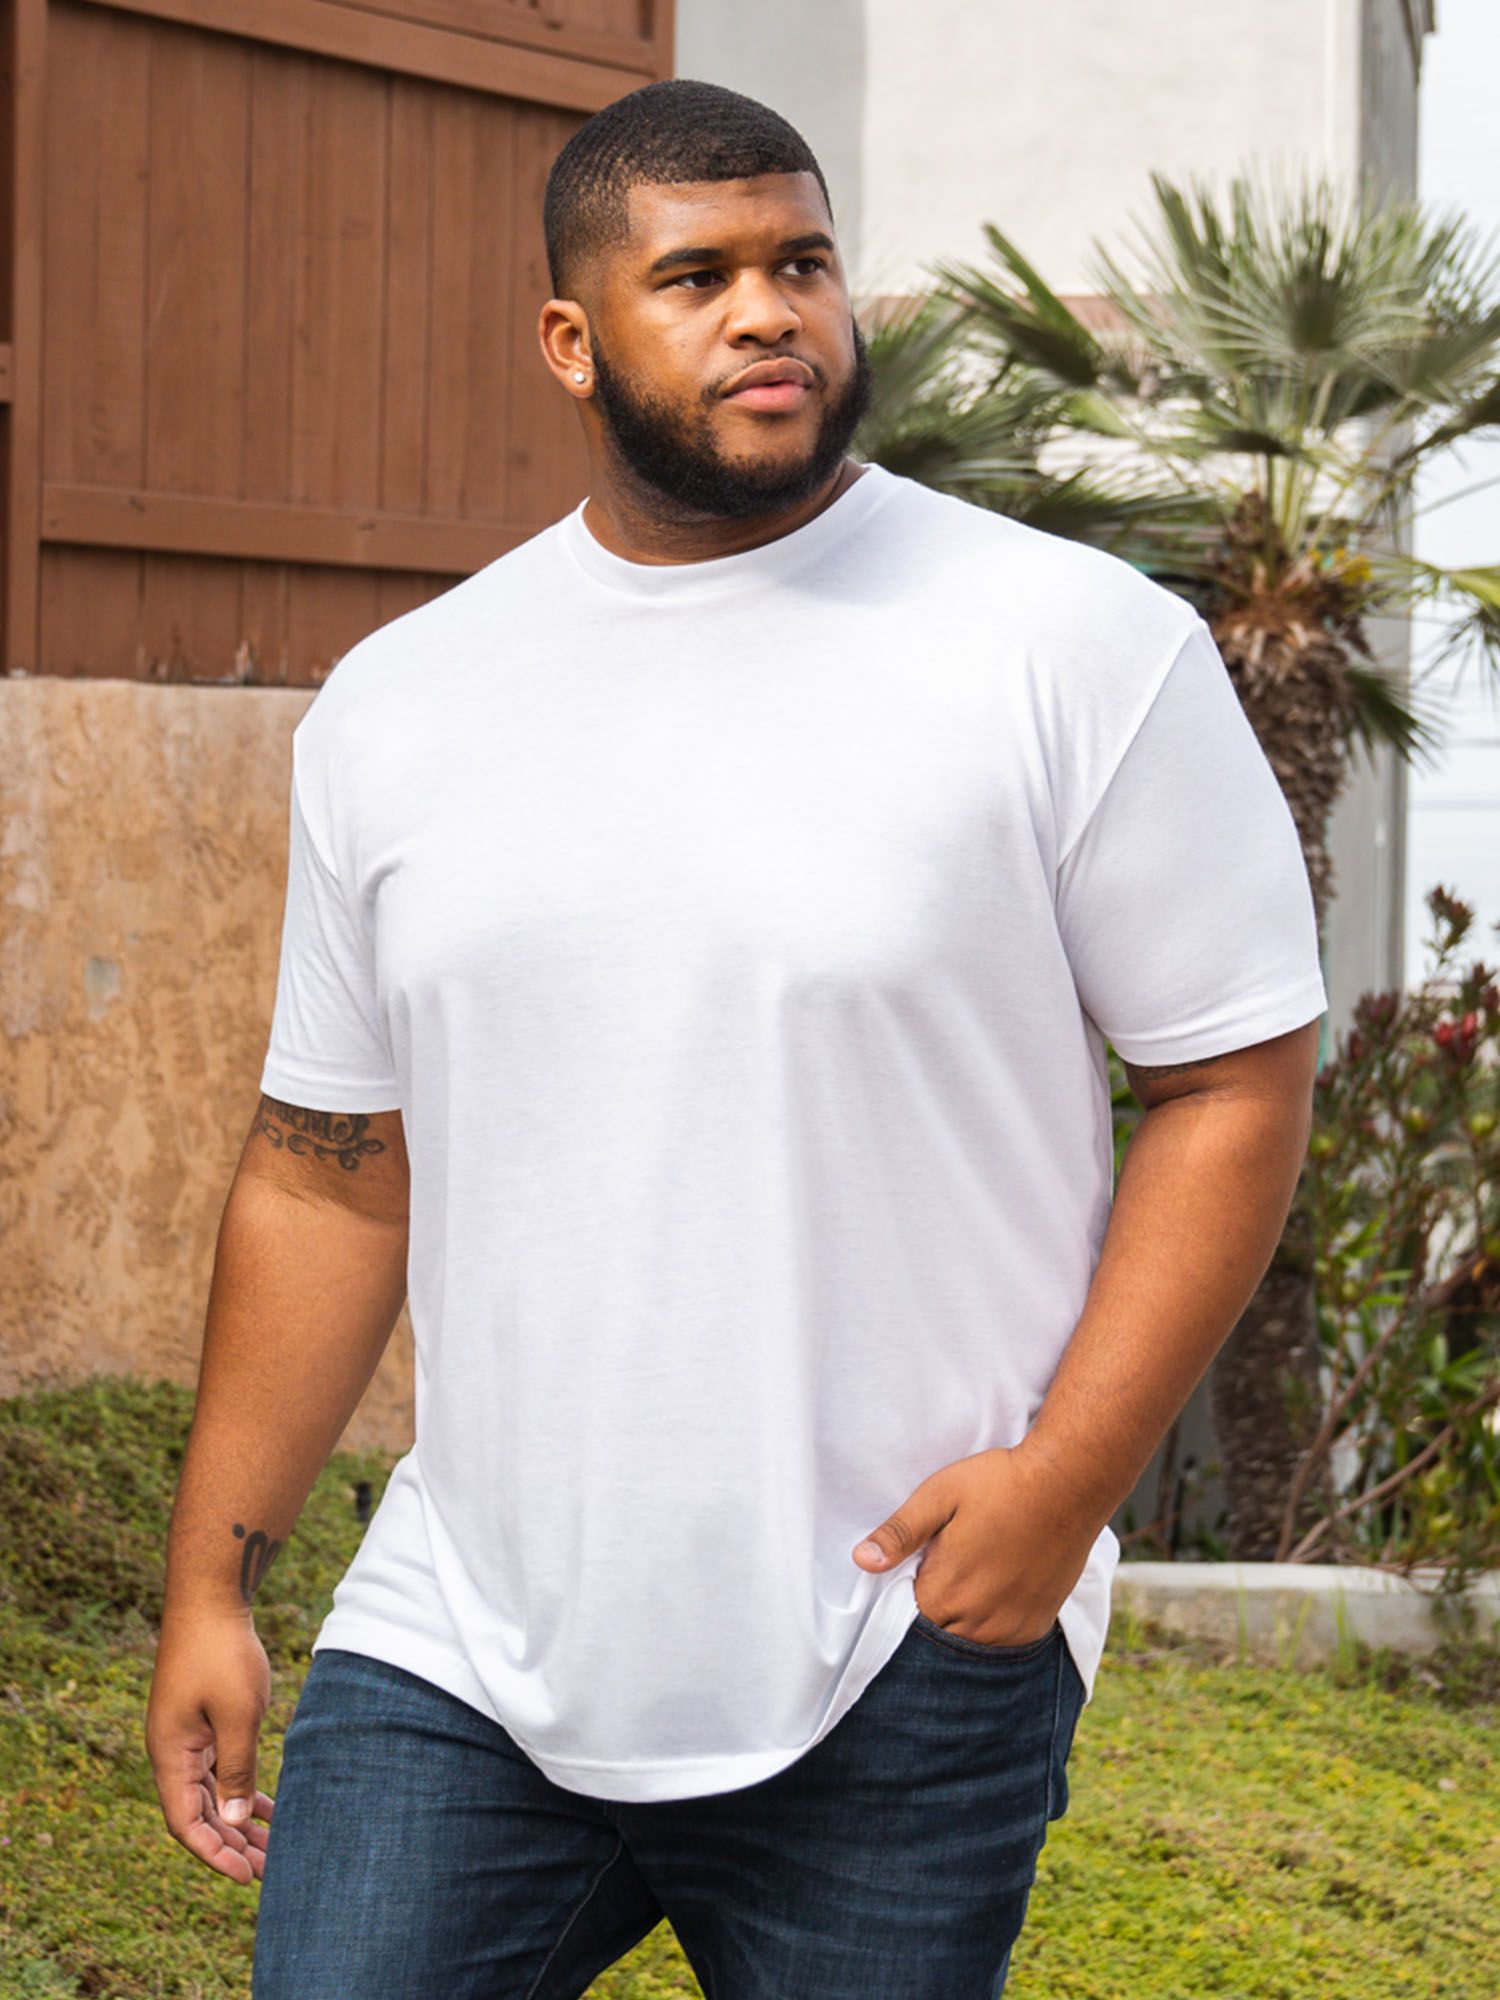 Best 5-Pack of Men's T-Shirts | Clean Threads